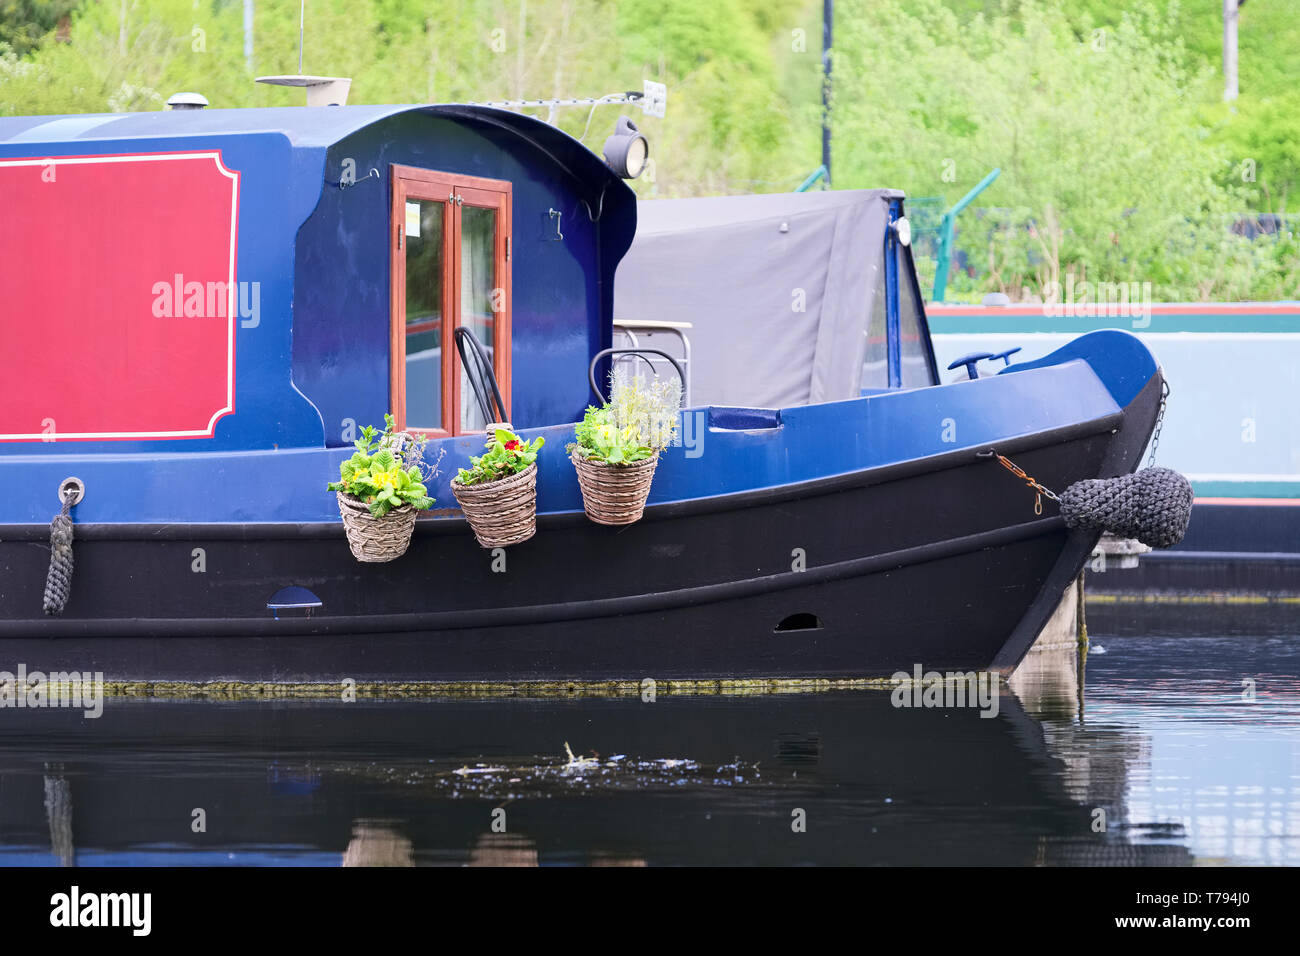 Barge boat on canal showing hanging flower pops Stock Photo